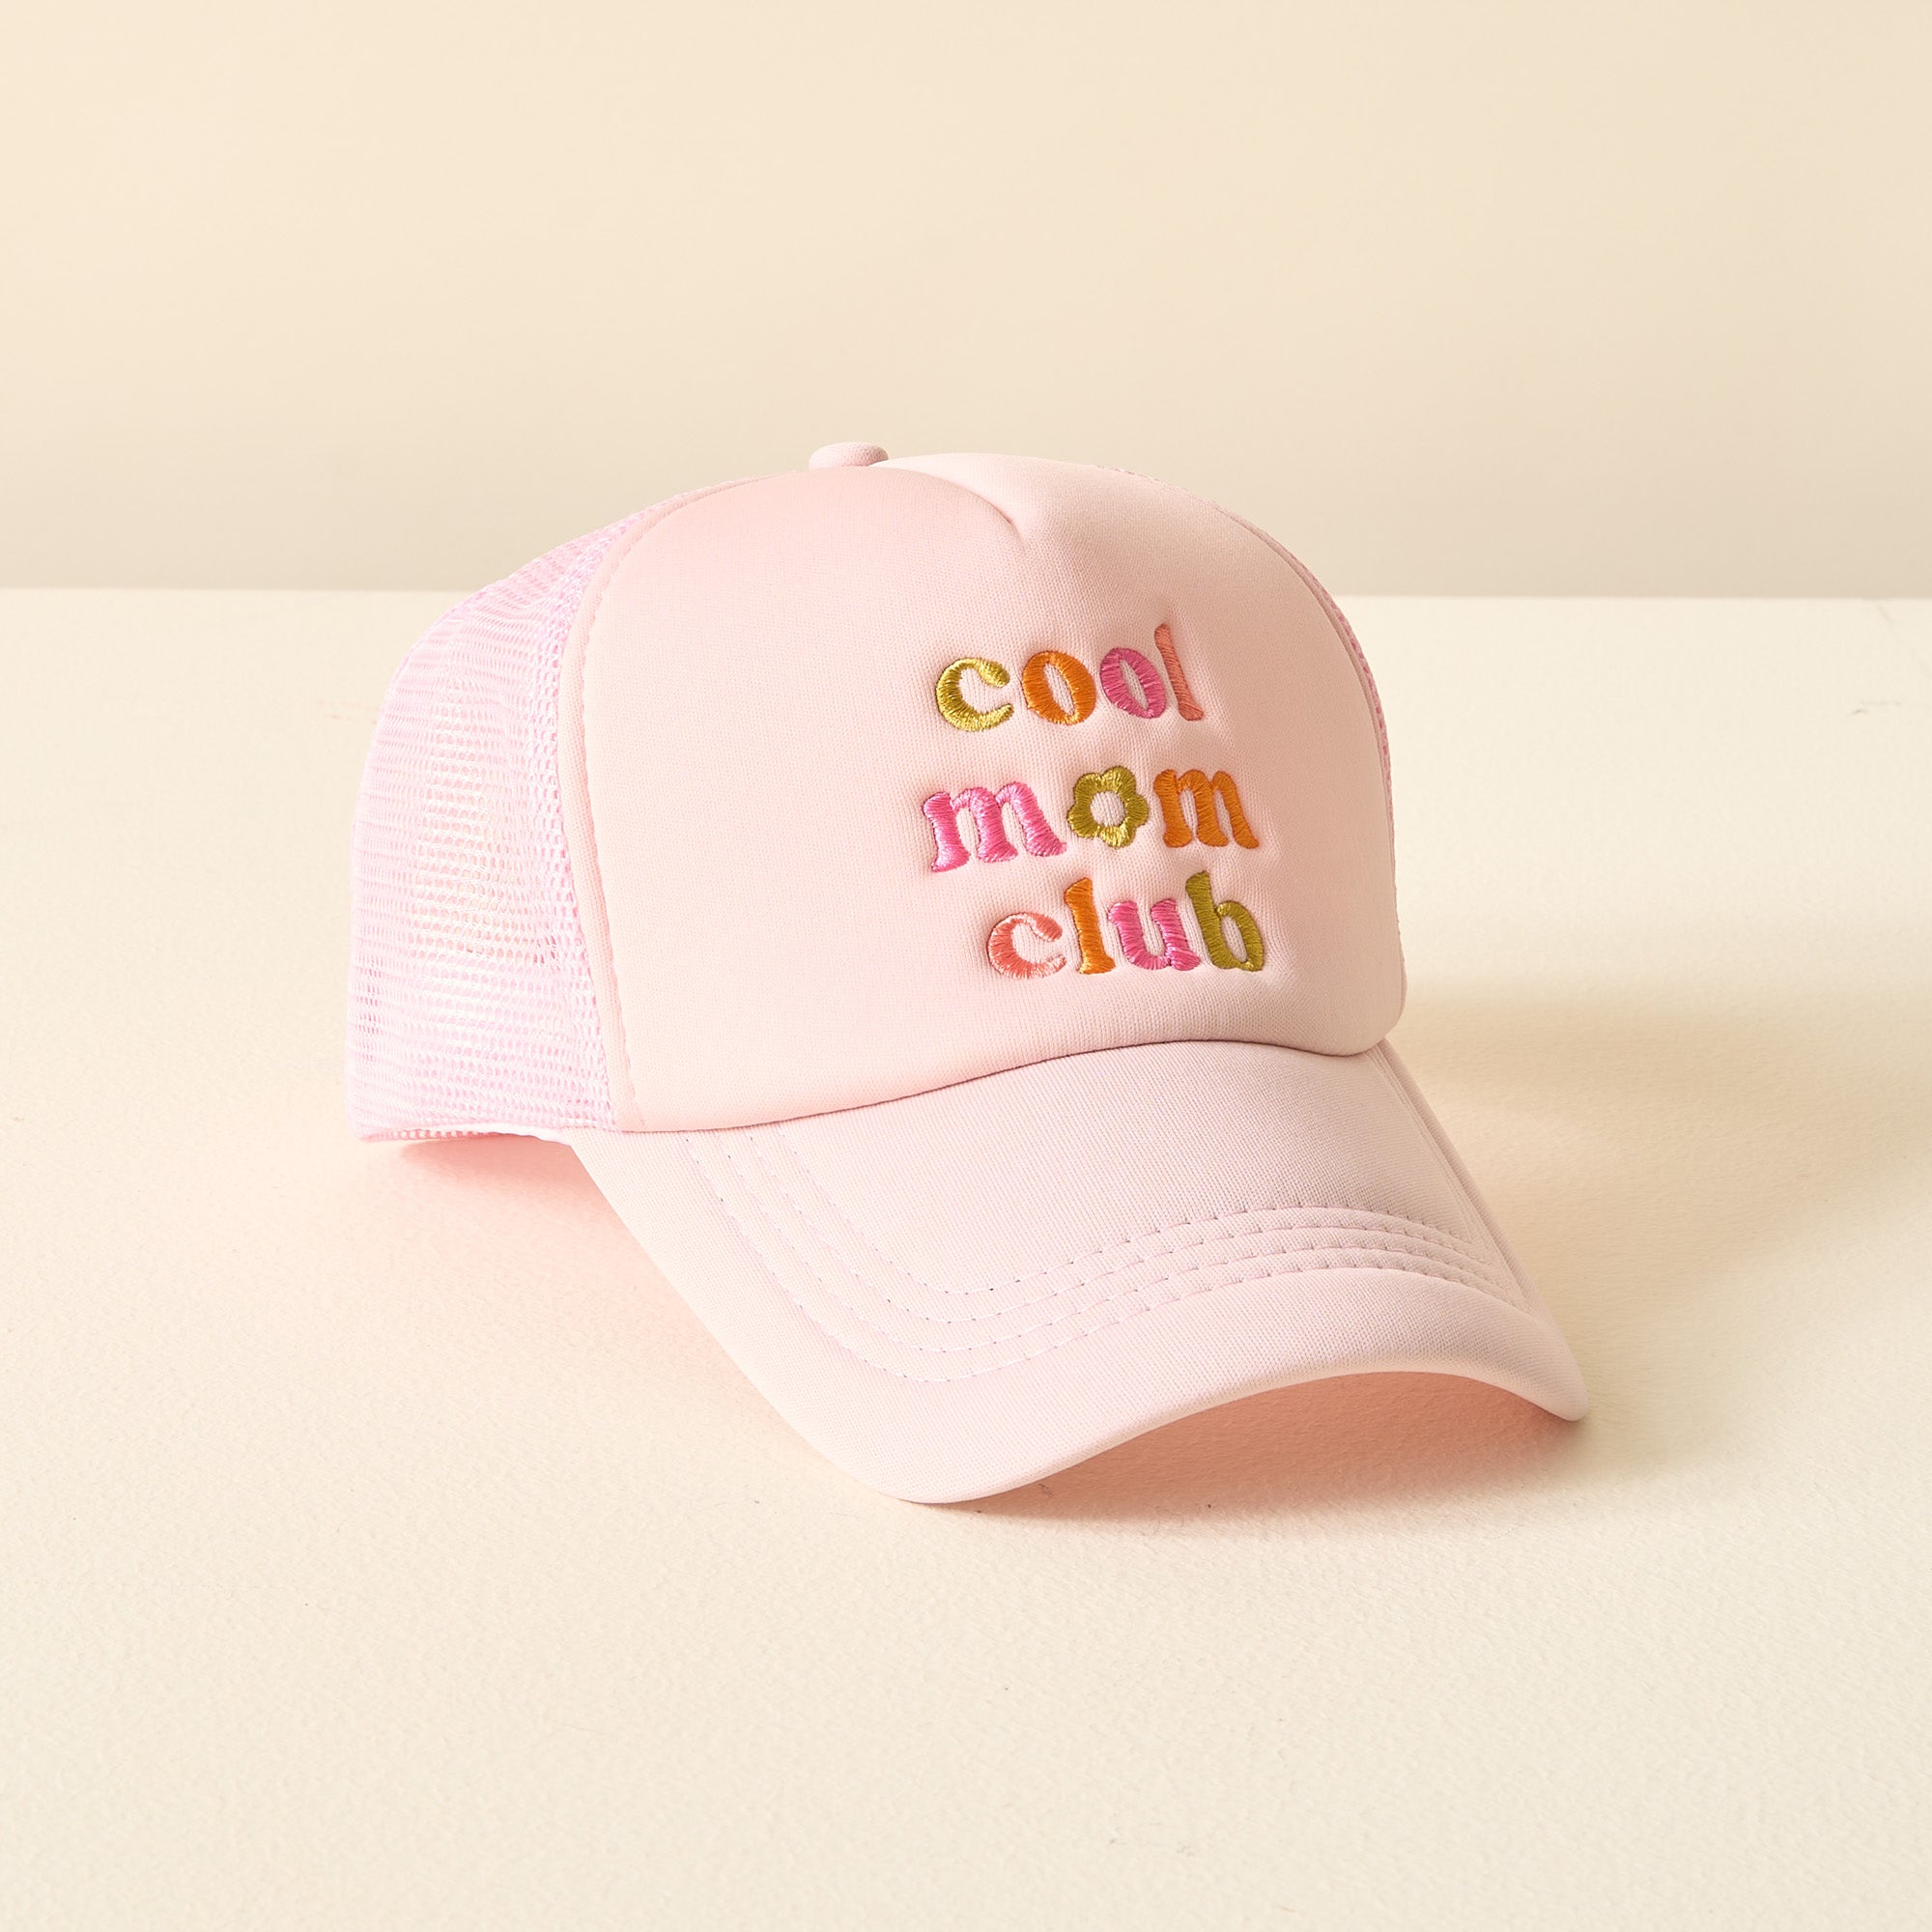 Embroidered Trucker Hat - Cool Mom Club